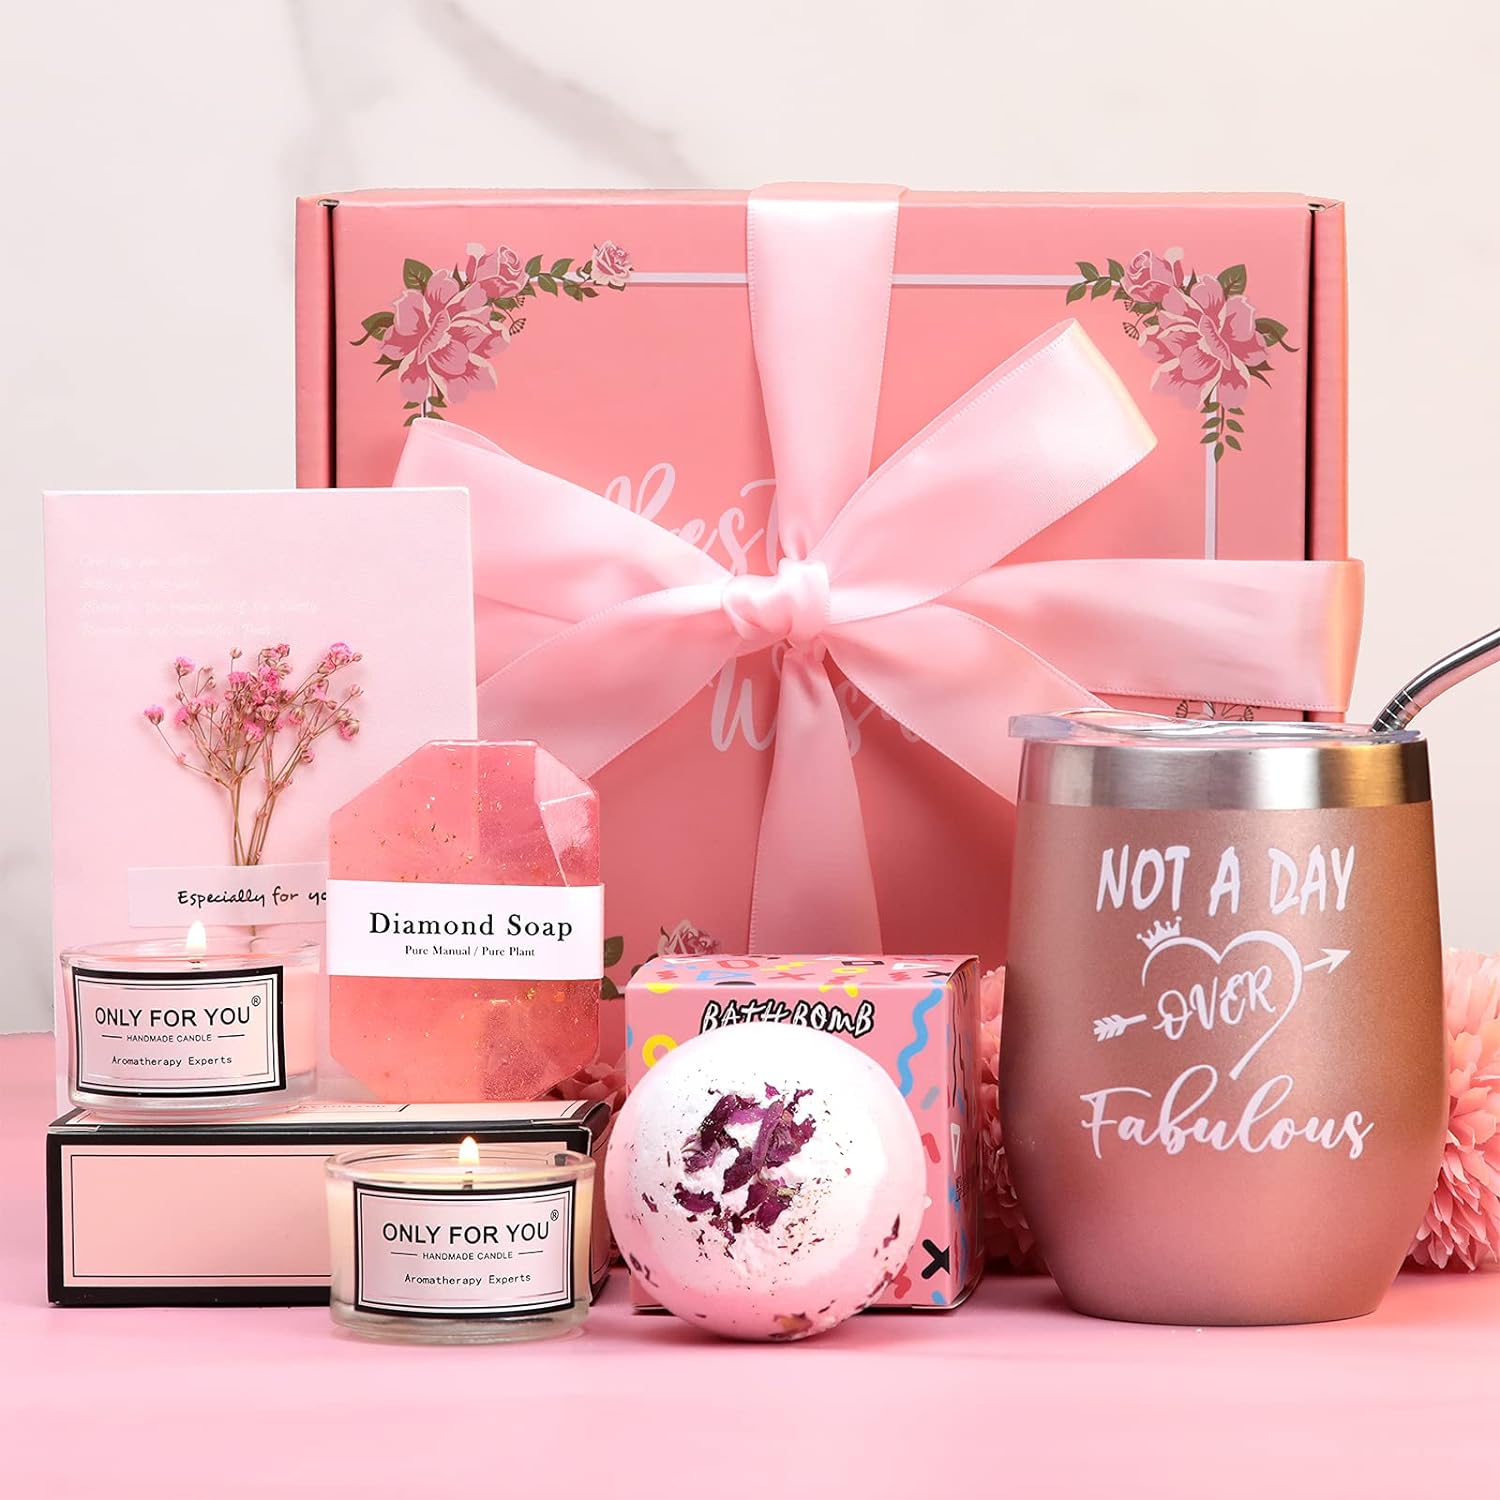 Birthday Gifts For Women, Gift Box Baskets For Women Her Best Friend Sister Wife Daughter Mom Granma, Self Care Gifts For Women, 40th 50th 60th Mothers Day Gifts Anniversary Giftss For Her Cadeau Femme Christmas Gifts